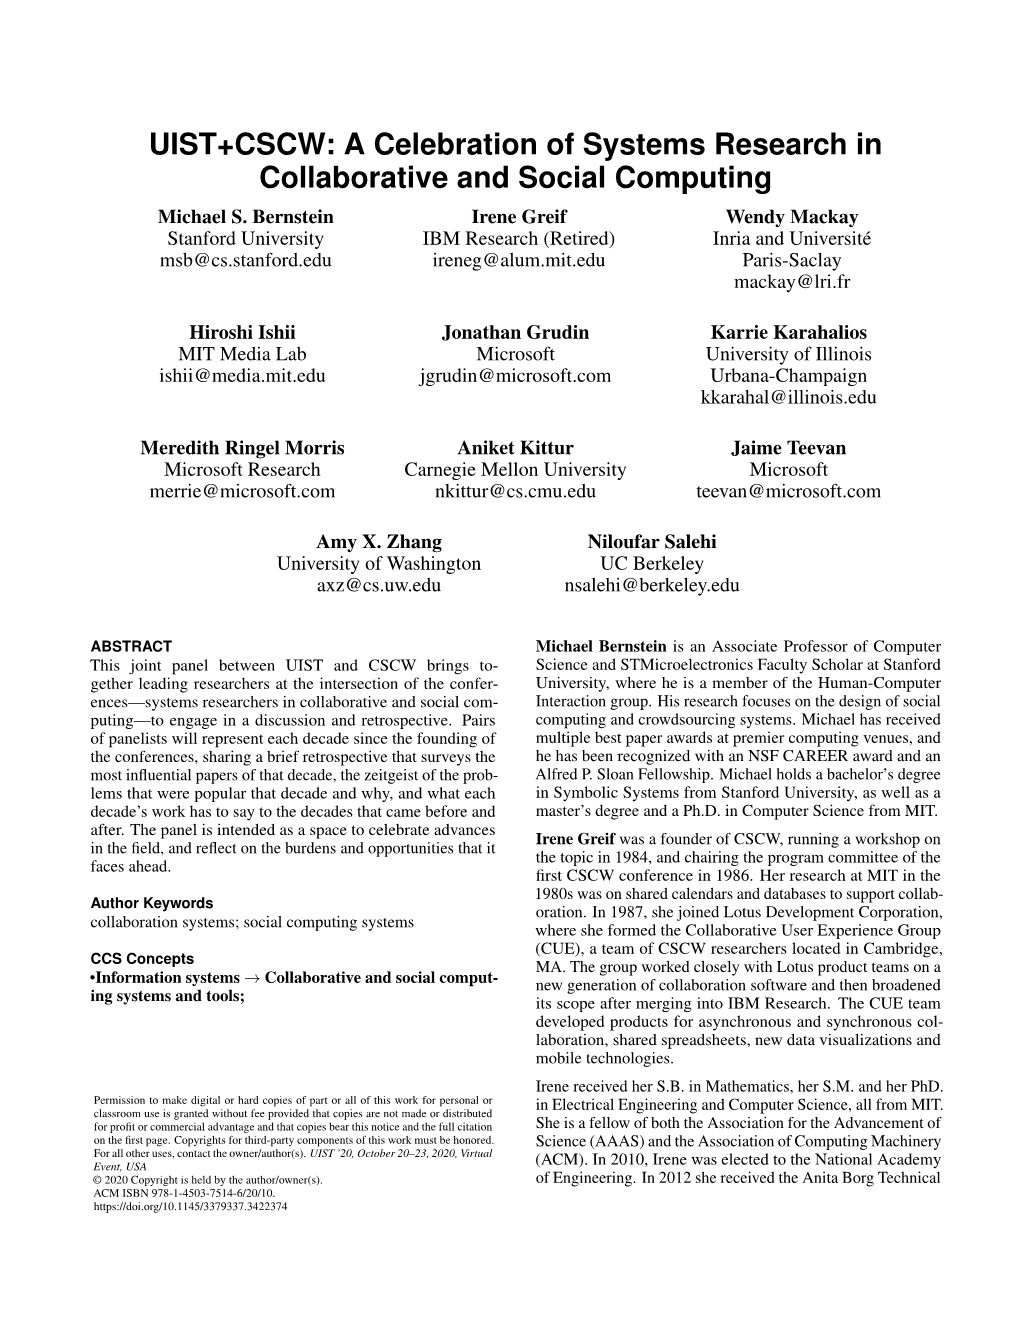 UIST+CSCW: a Celebration of Systems Research in Collaborative and Social Computing Michael S